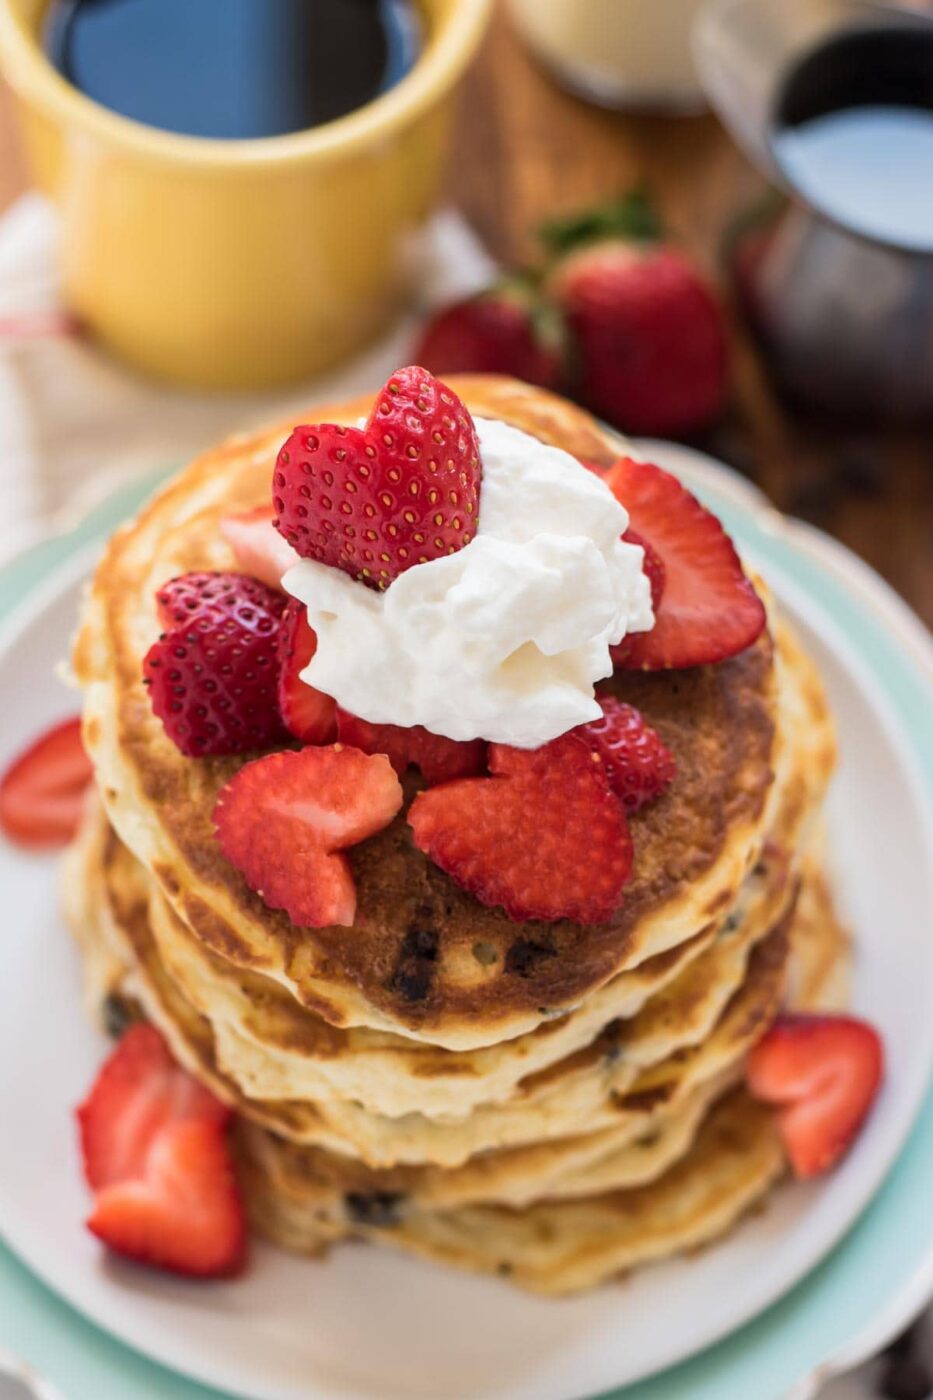 If you really want to make someone feel special, make them these Strawberry Chocolate Chip Pancakes for breakfast!